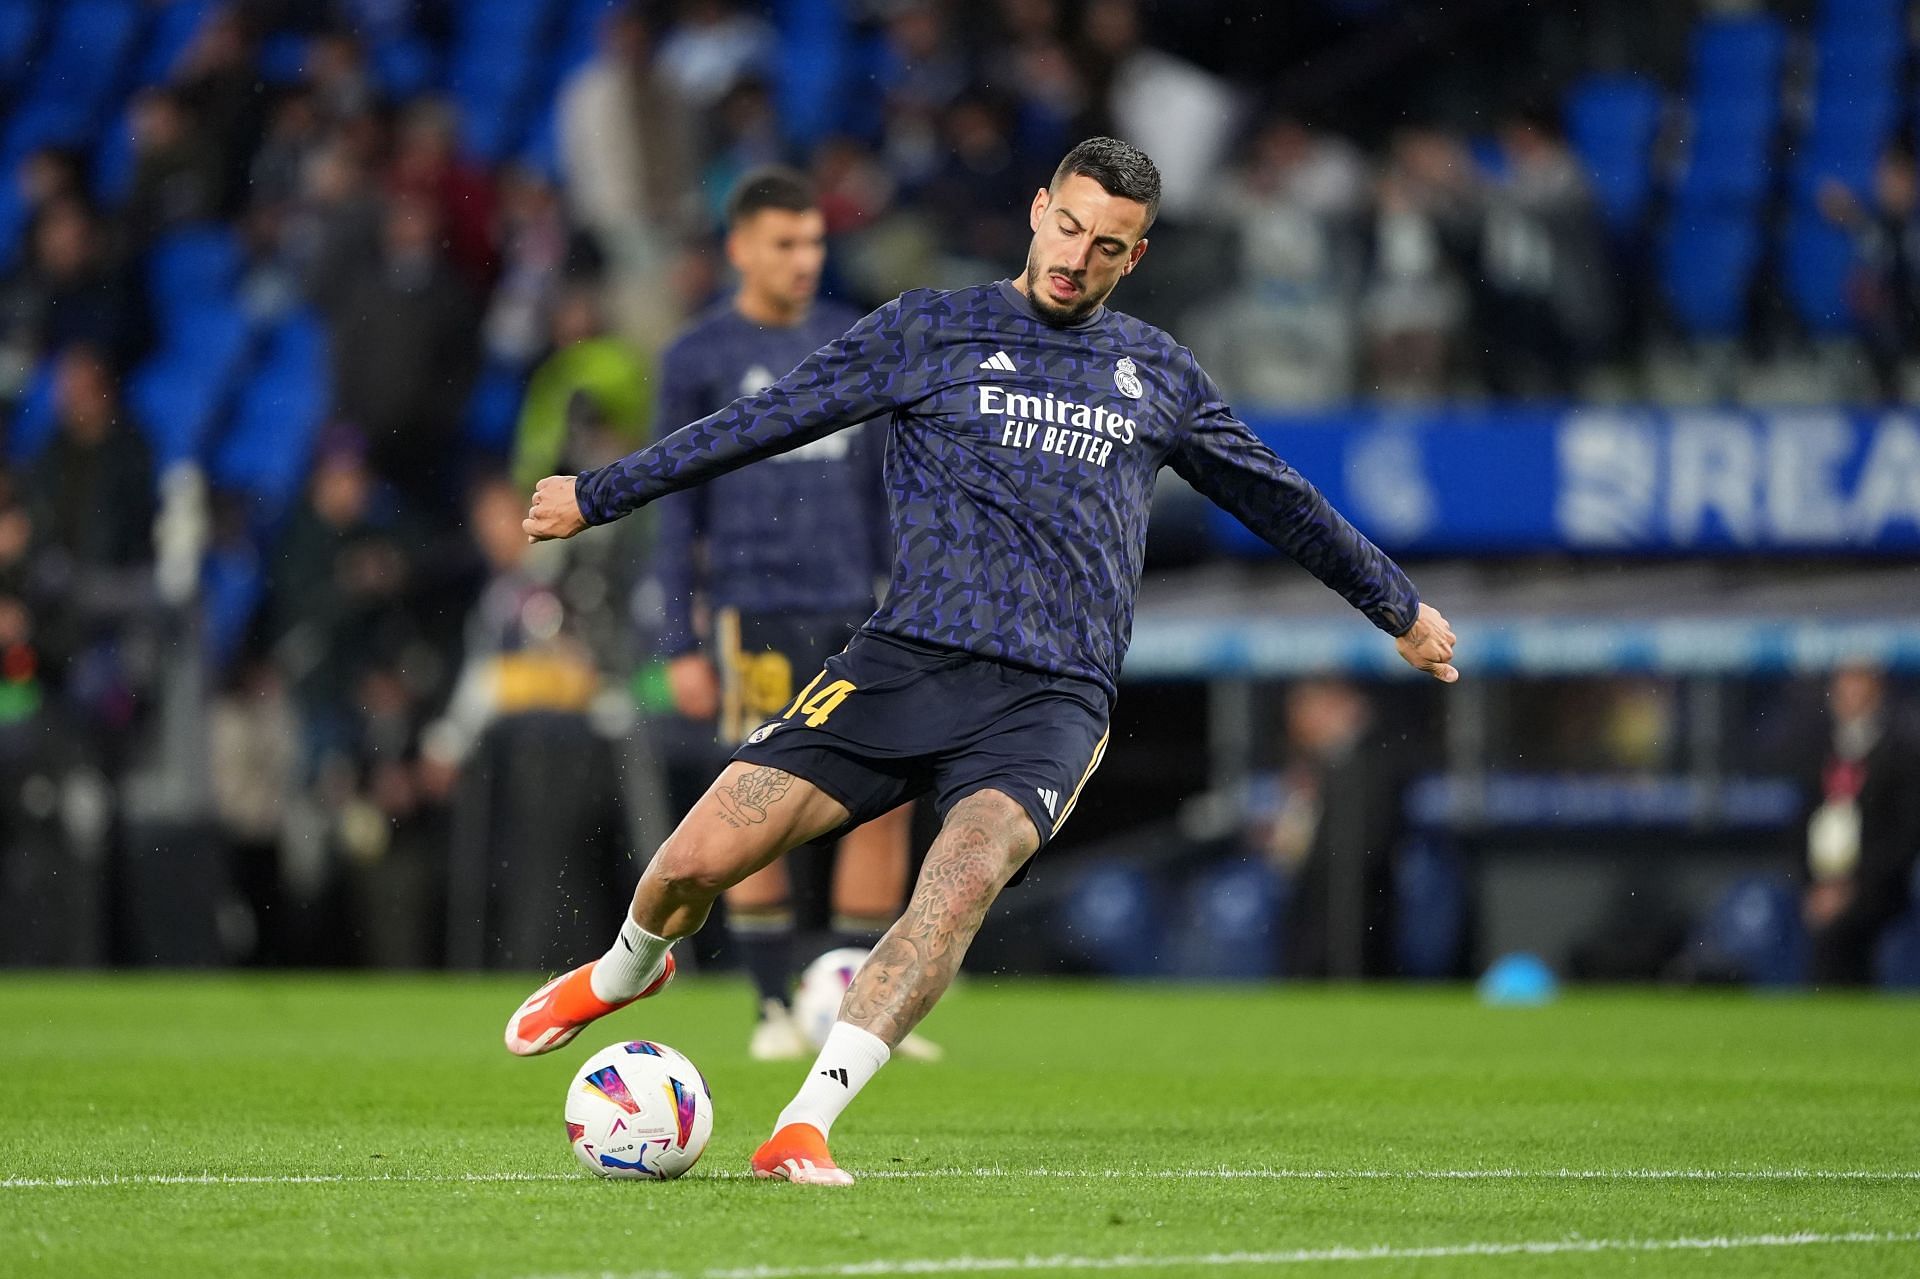 Joselu during the warm-ups for Real Sociedad.